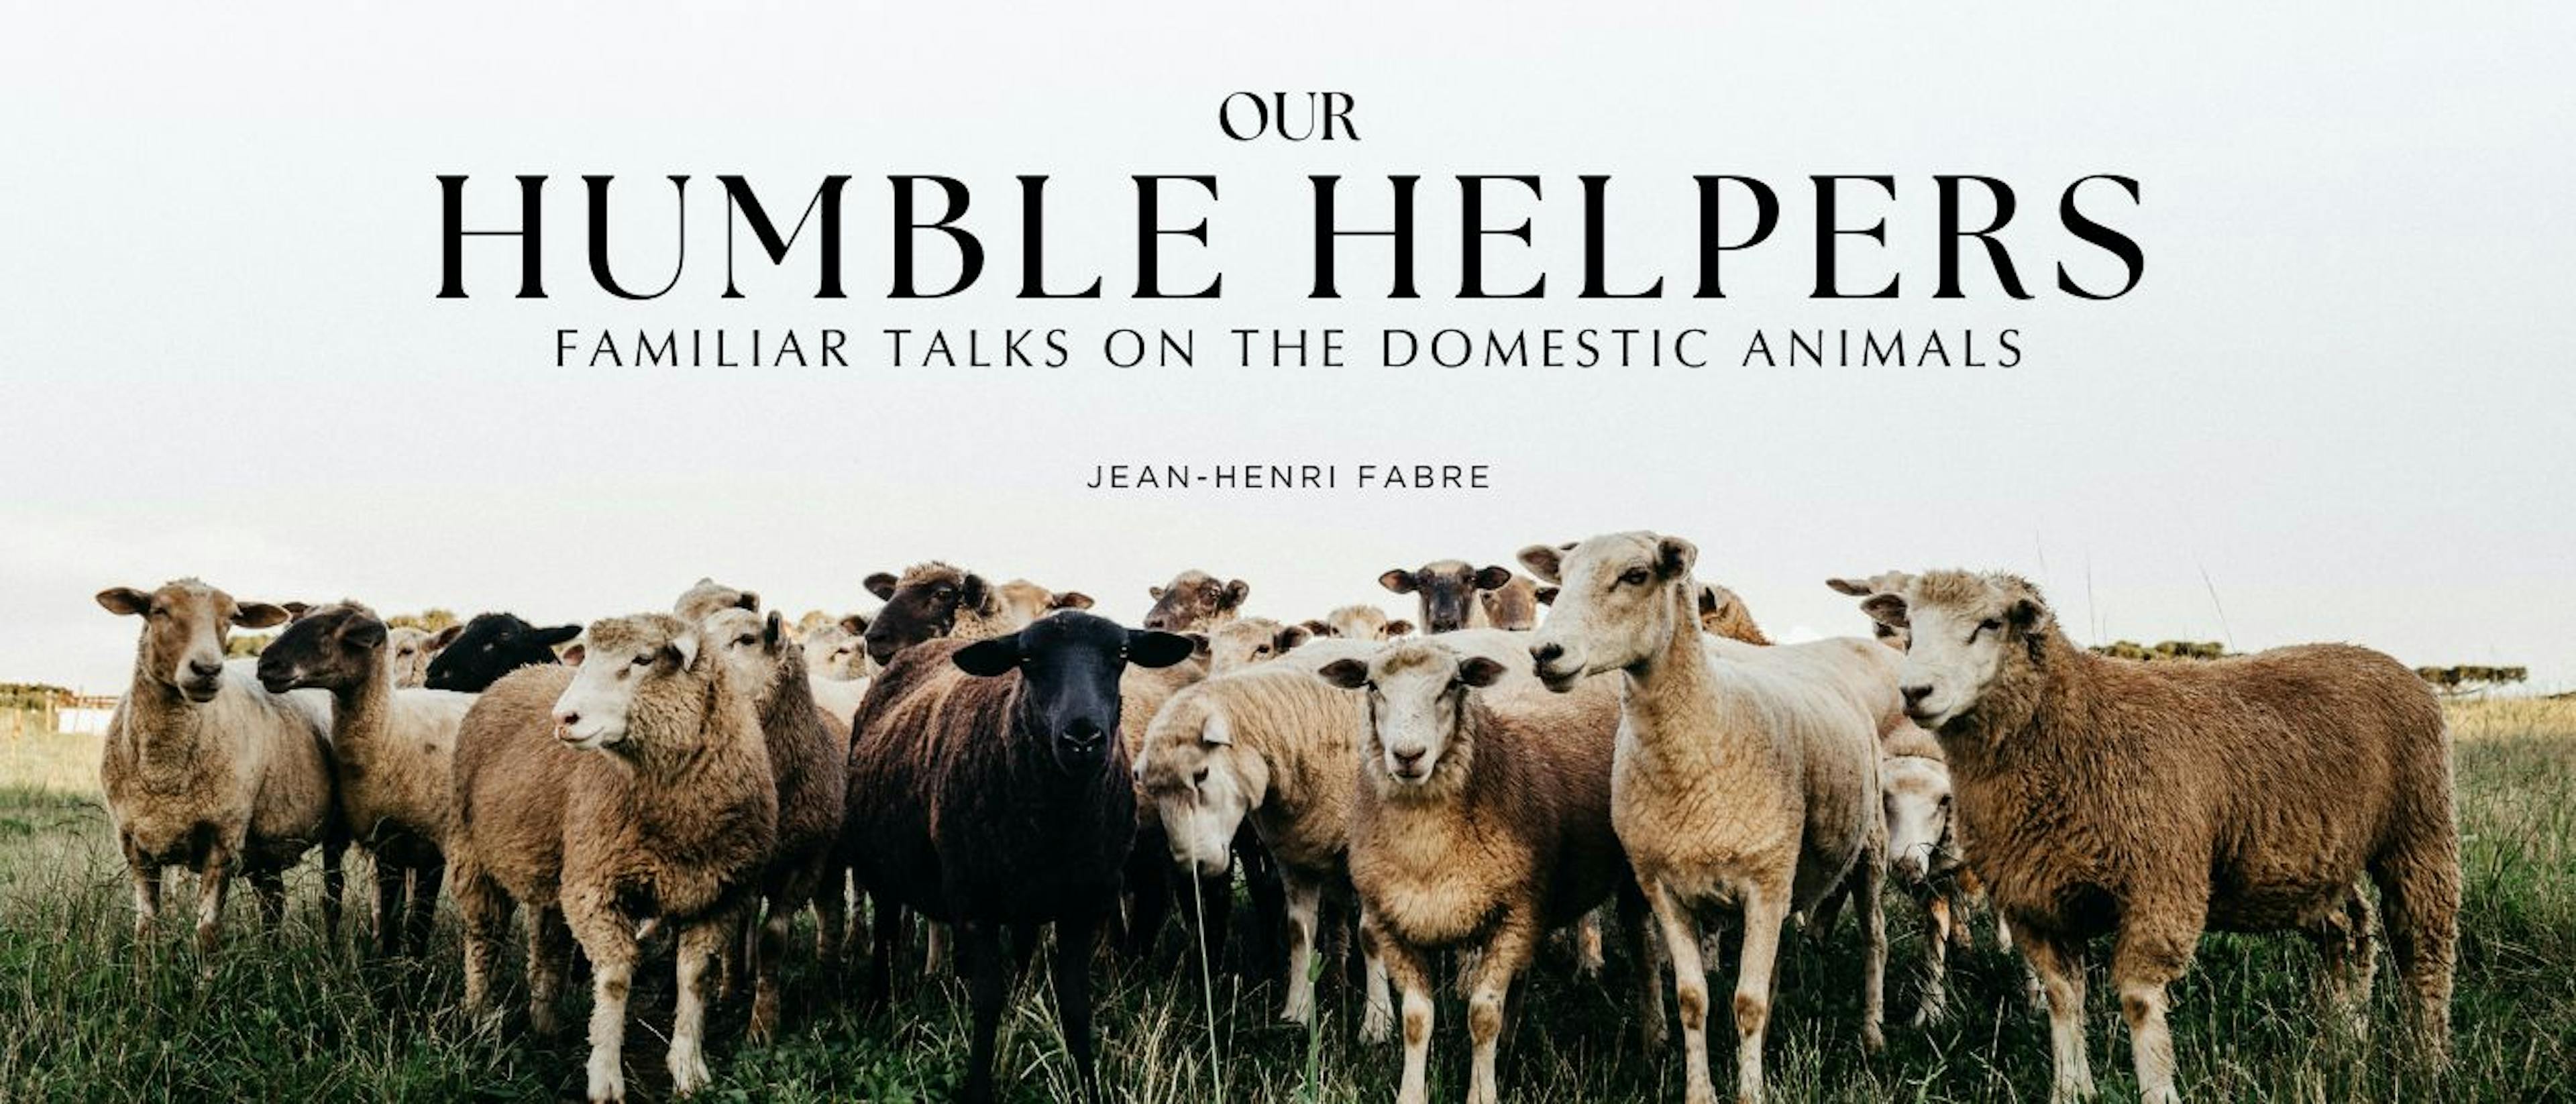 featured image - Our Humble Helpers: Familiar Talks on the Domestic Animals by Jean-Henri Fabre - Table of Links